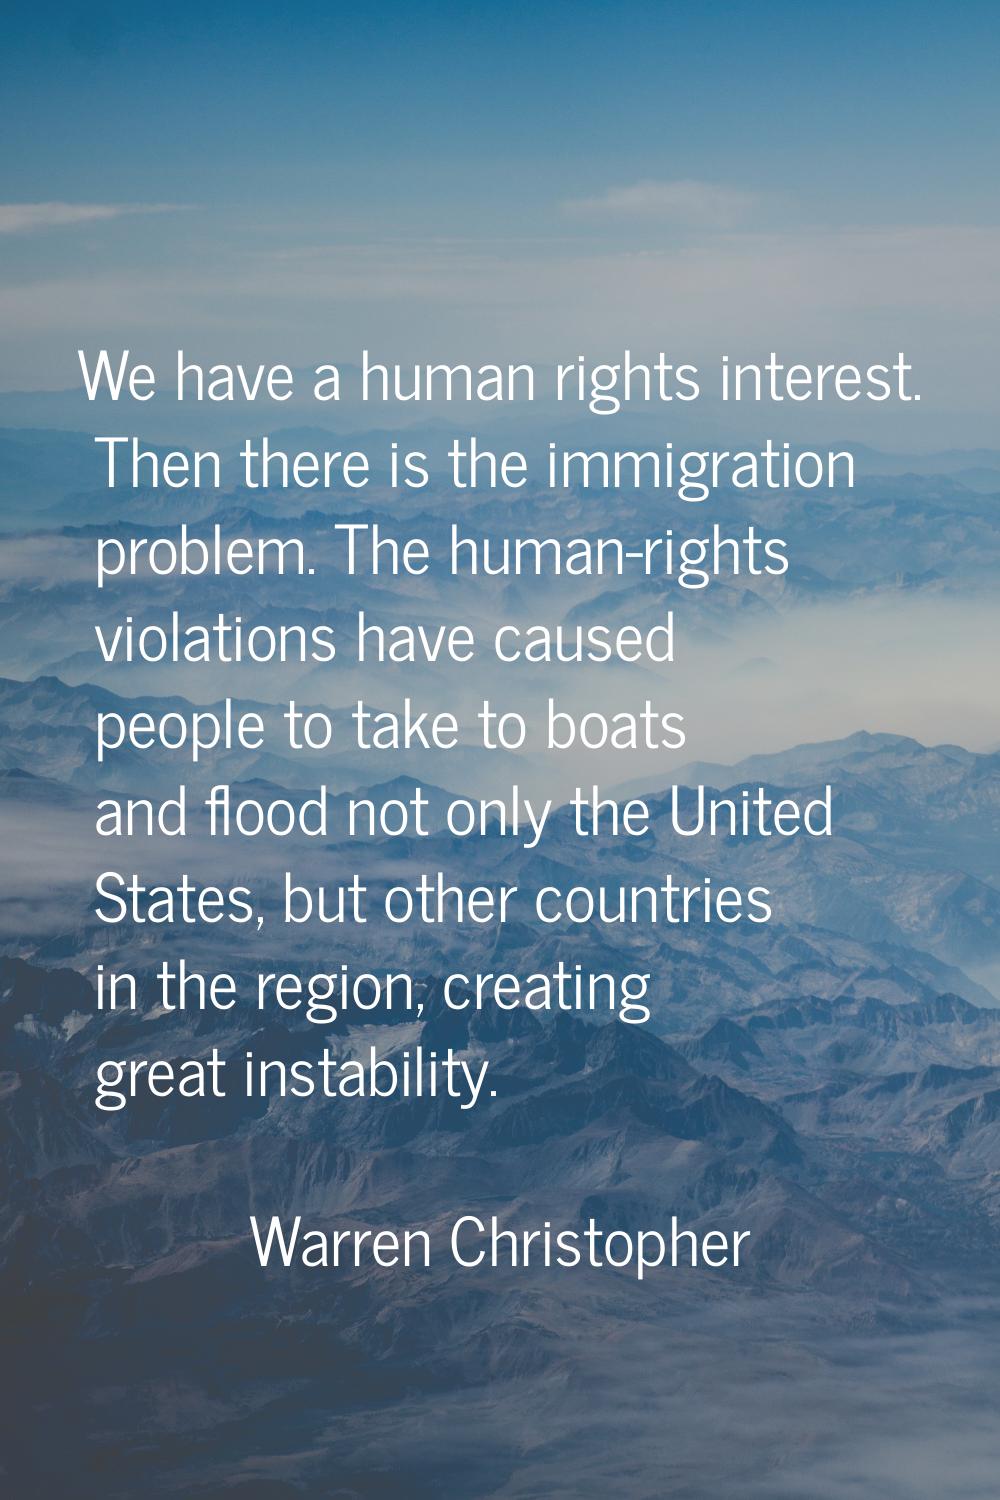 We have a human rights interest. Then there is the immigration problem. The human-rights violations